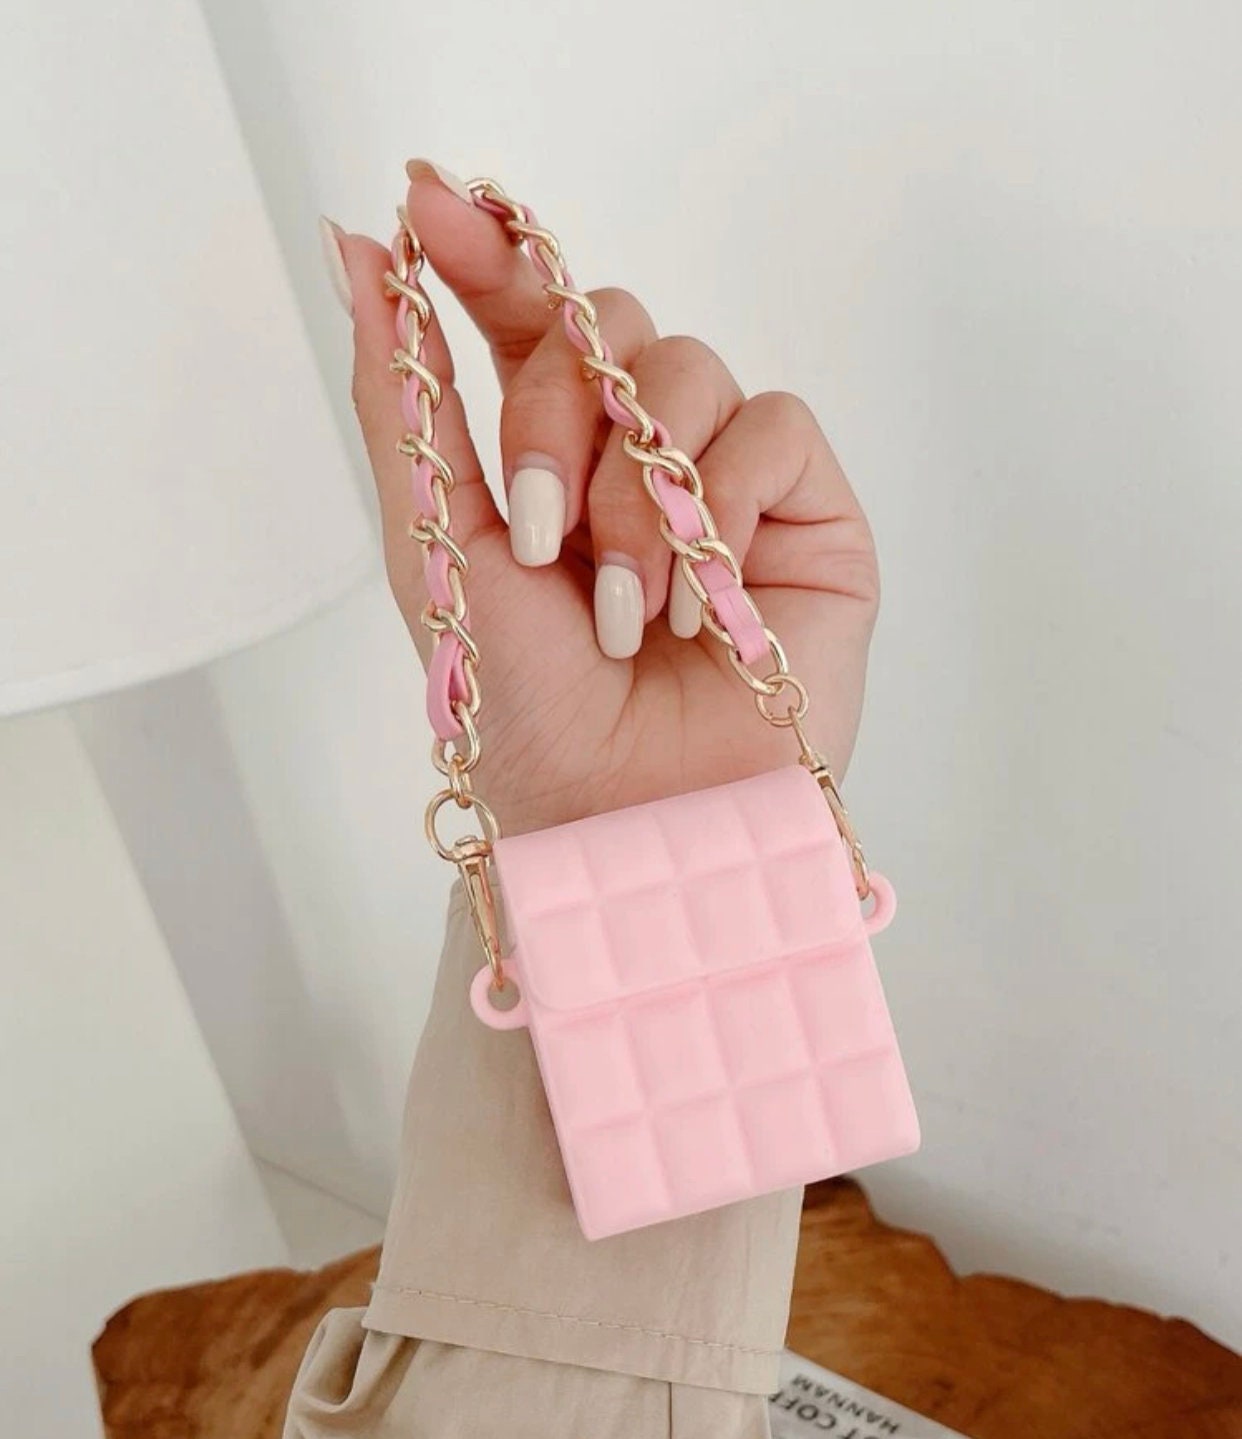 Designer AirPod Case Holder Gold Chain Key Quilted Pink Leather